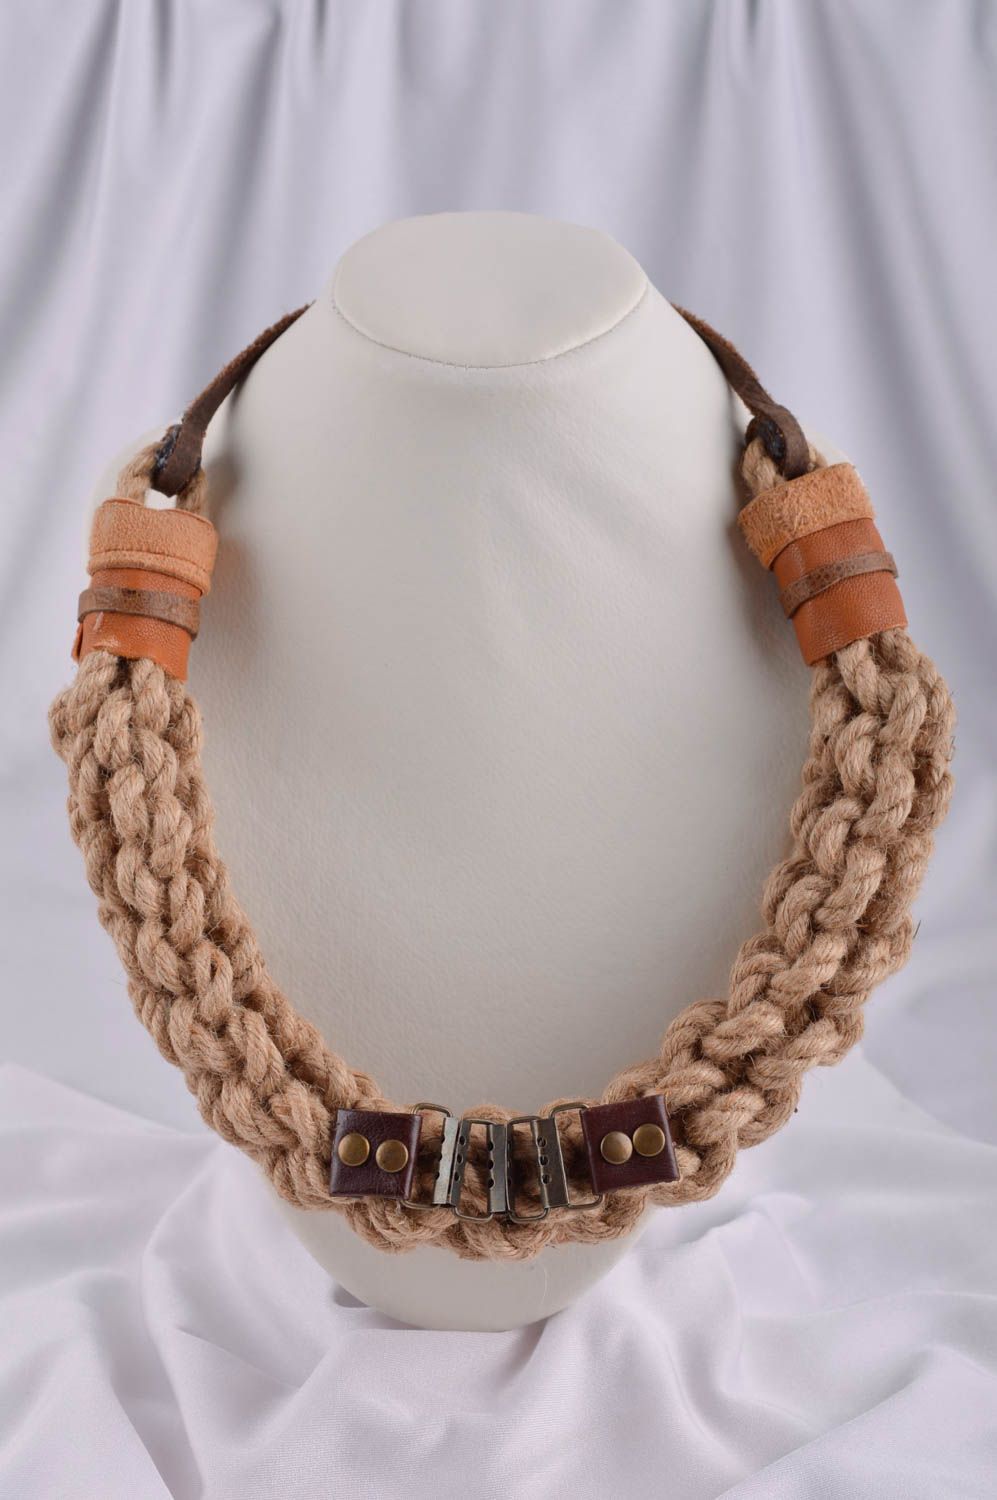 Leather necklace handmade braided necklace designer jewelry women accessories photo 1